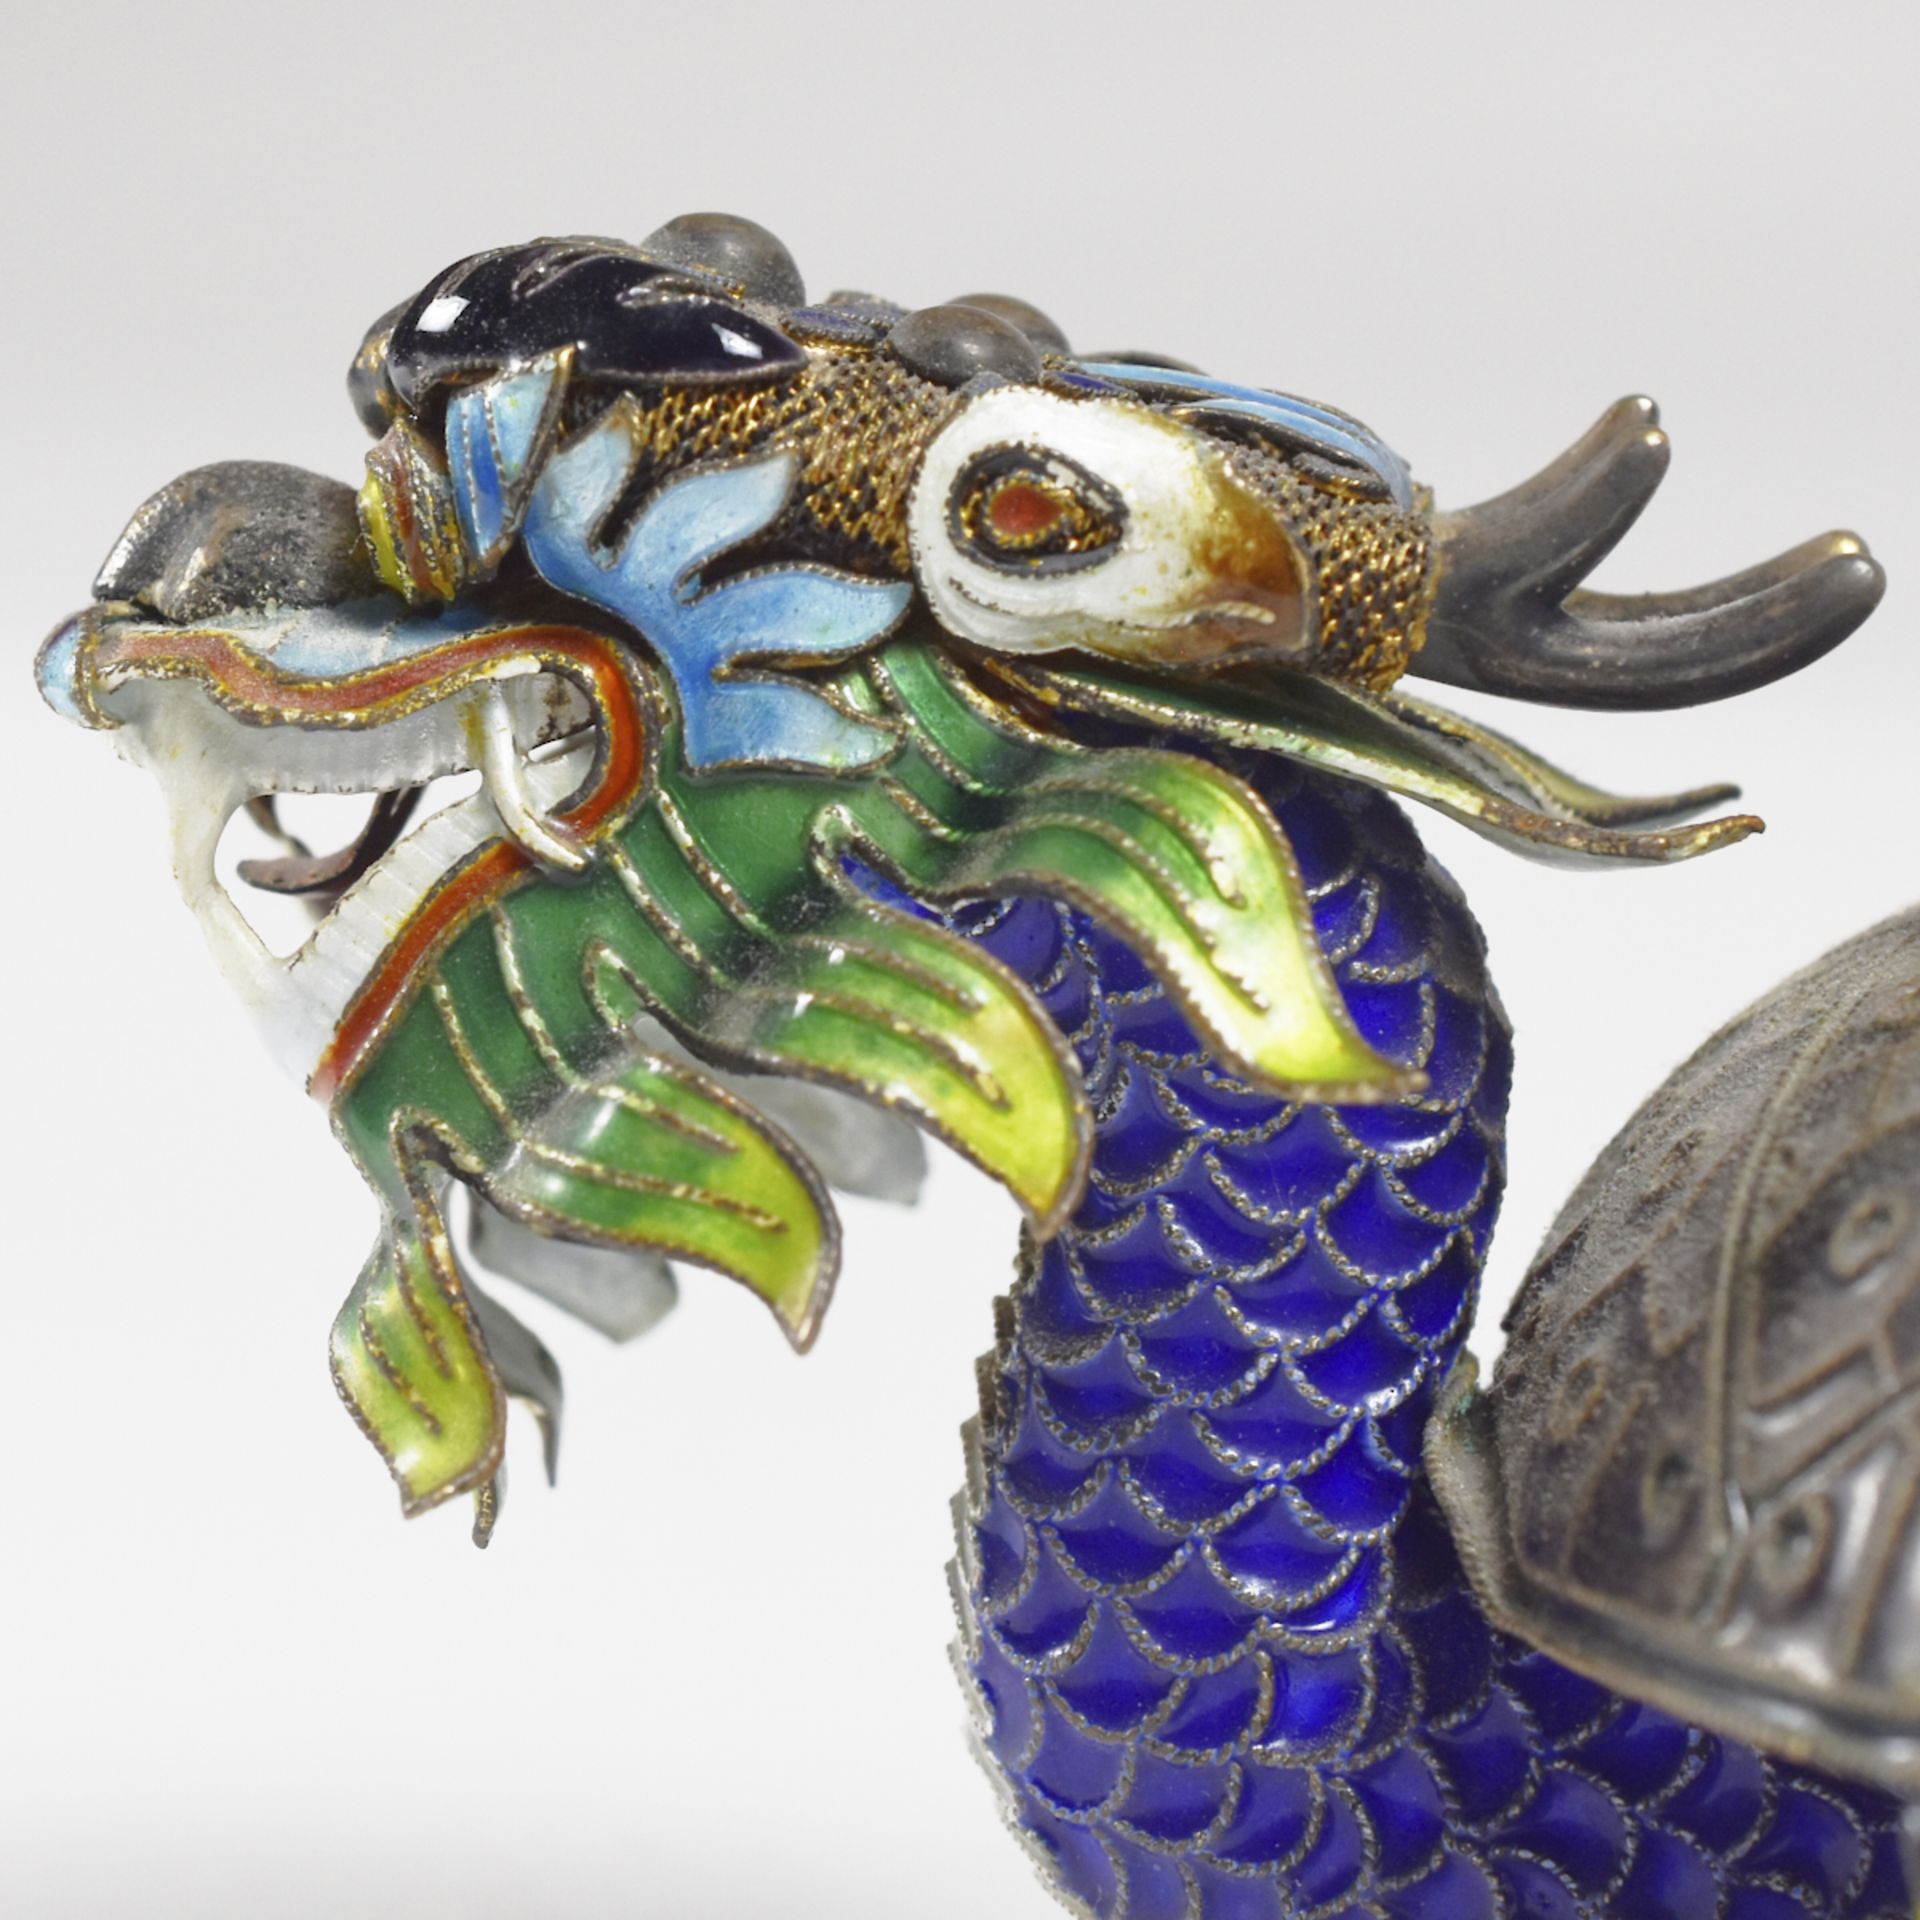 20th c. Chinese Silver Enameled Silver & Jade Dragon Ashtray - Image 6 of 8